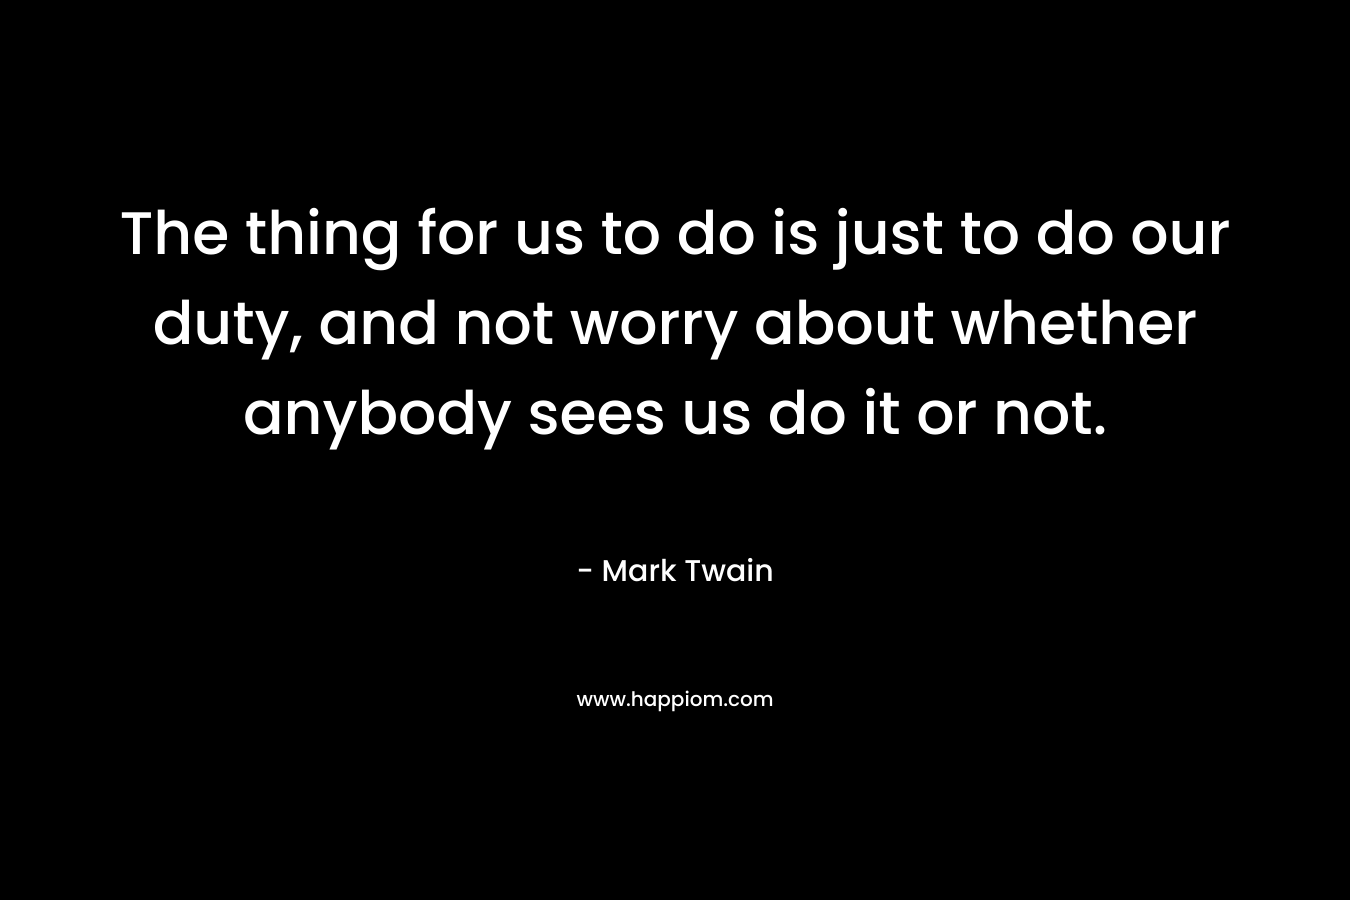 The thing for us to do is just to do our duty, and not worry about whether anybody sees us do it or not. – Mark Twain